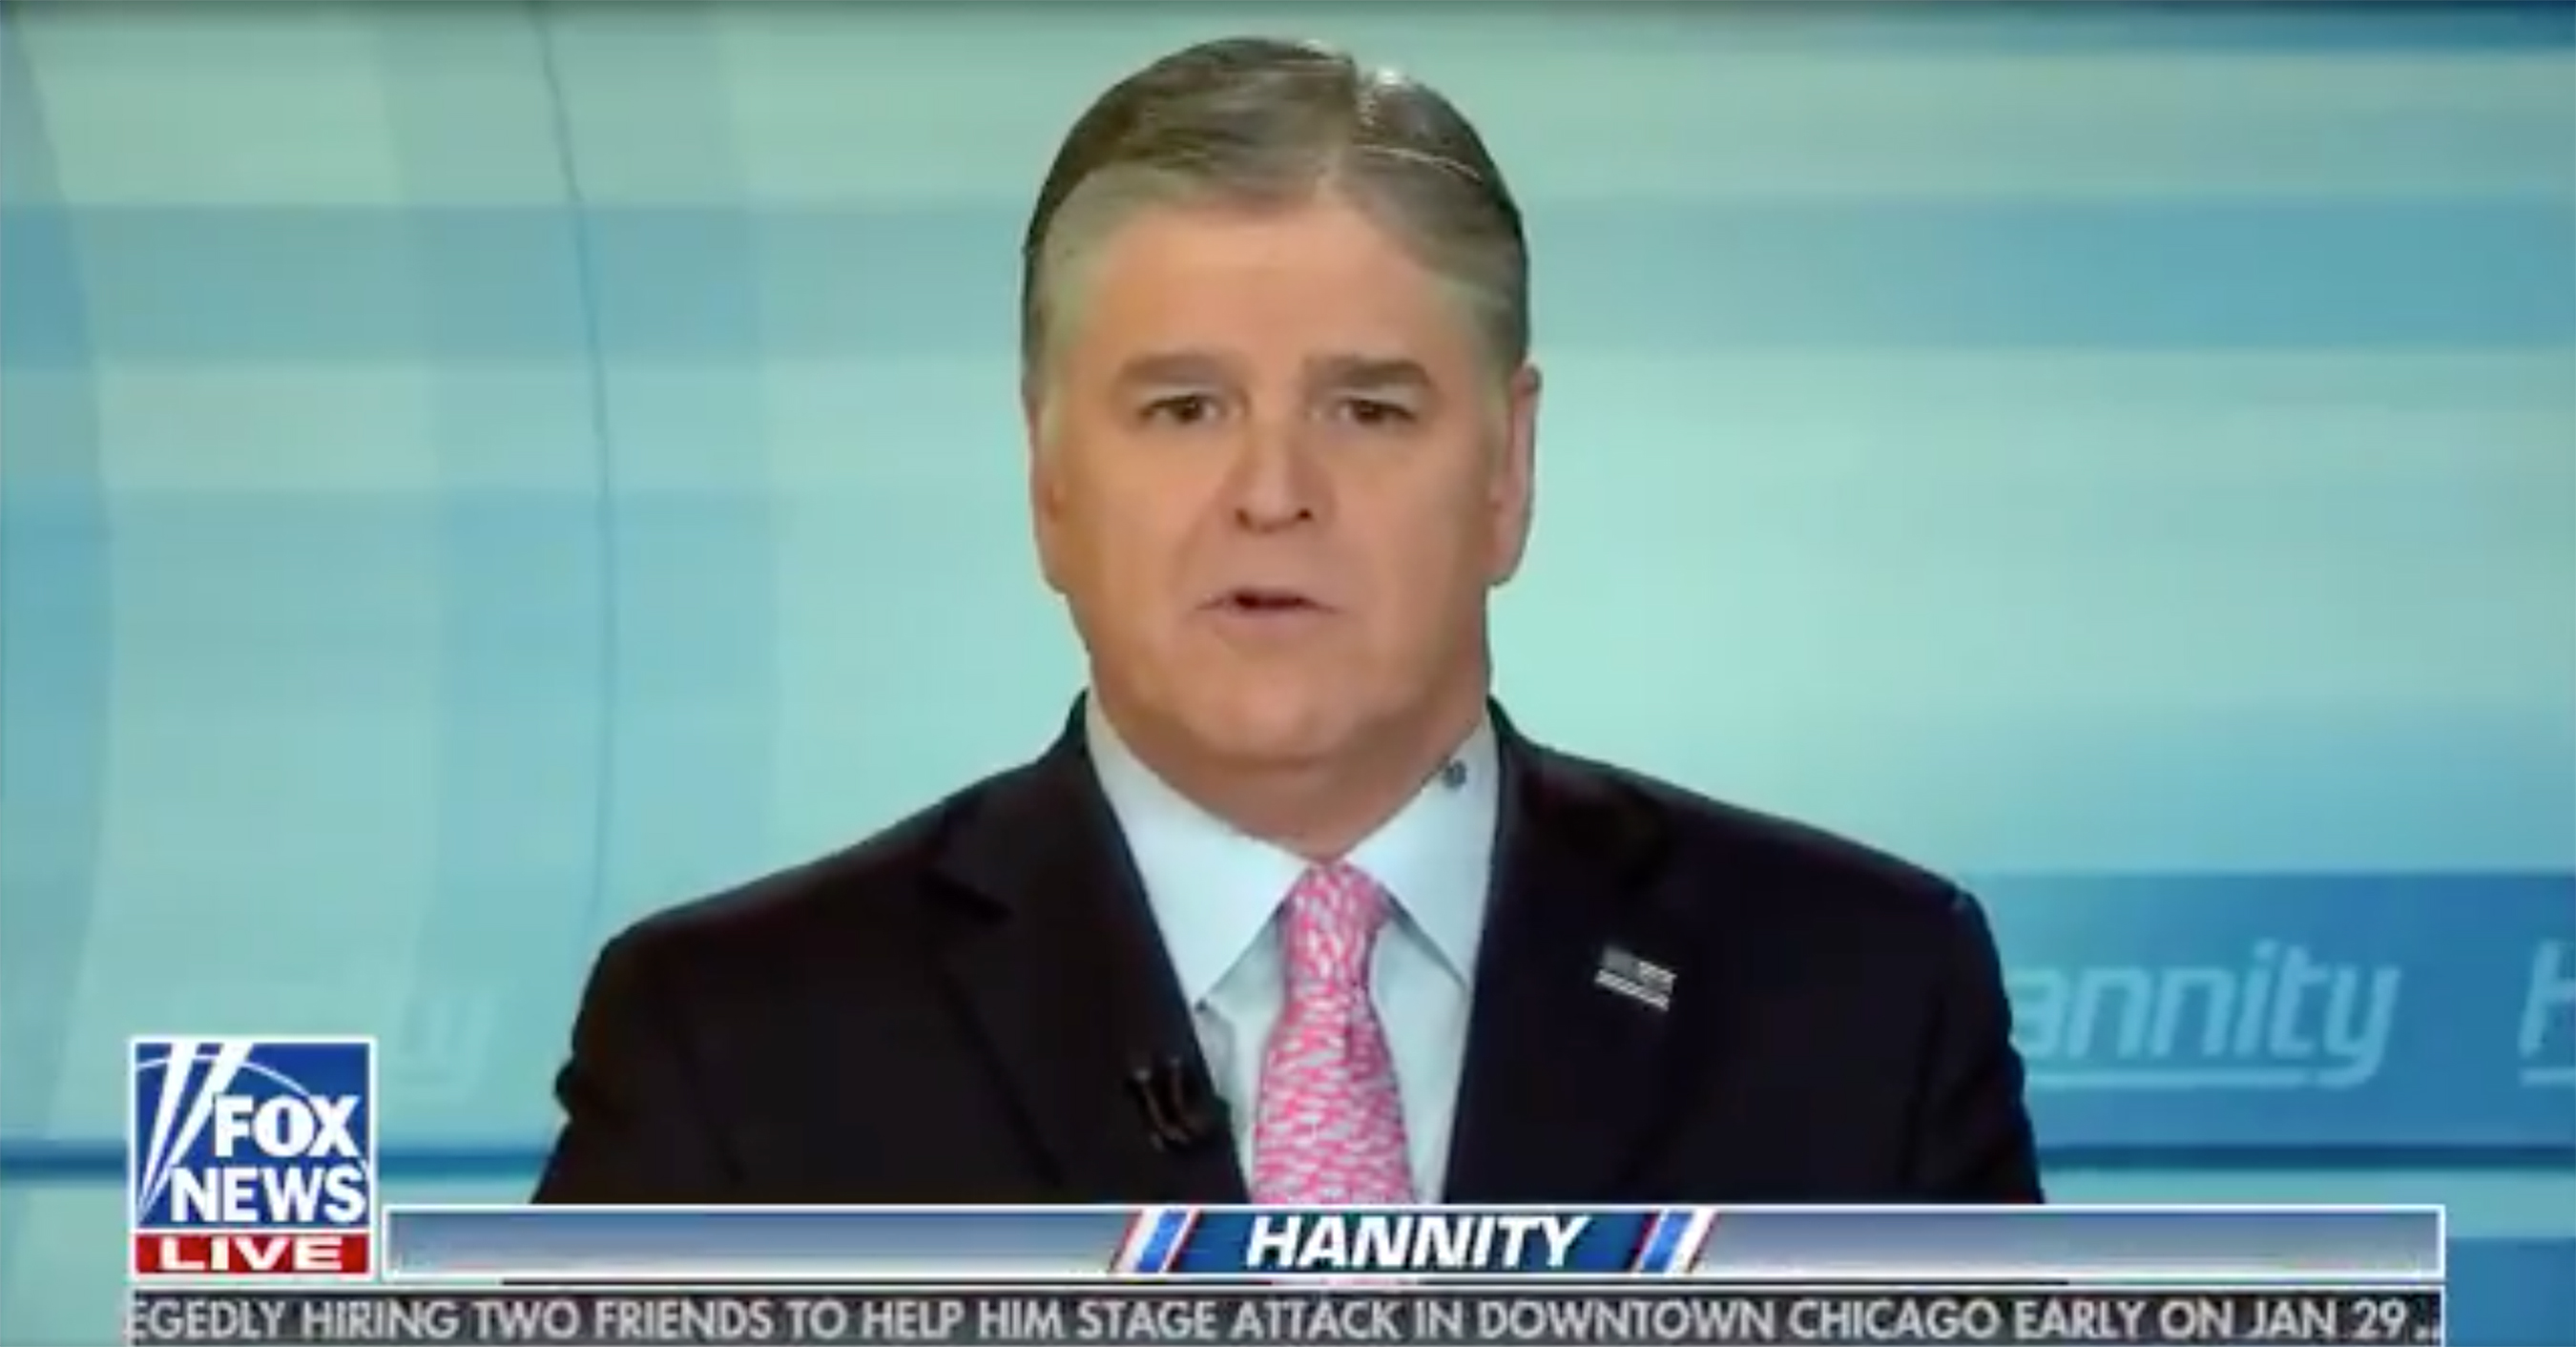 Watch Creepy Crawly Bug Make Its Way Up Sean Hannity’s Neck During LIVE Broadcast